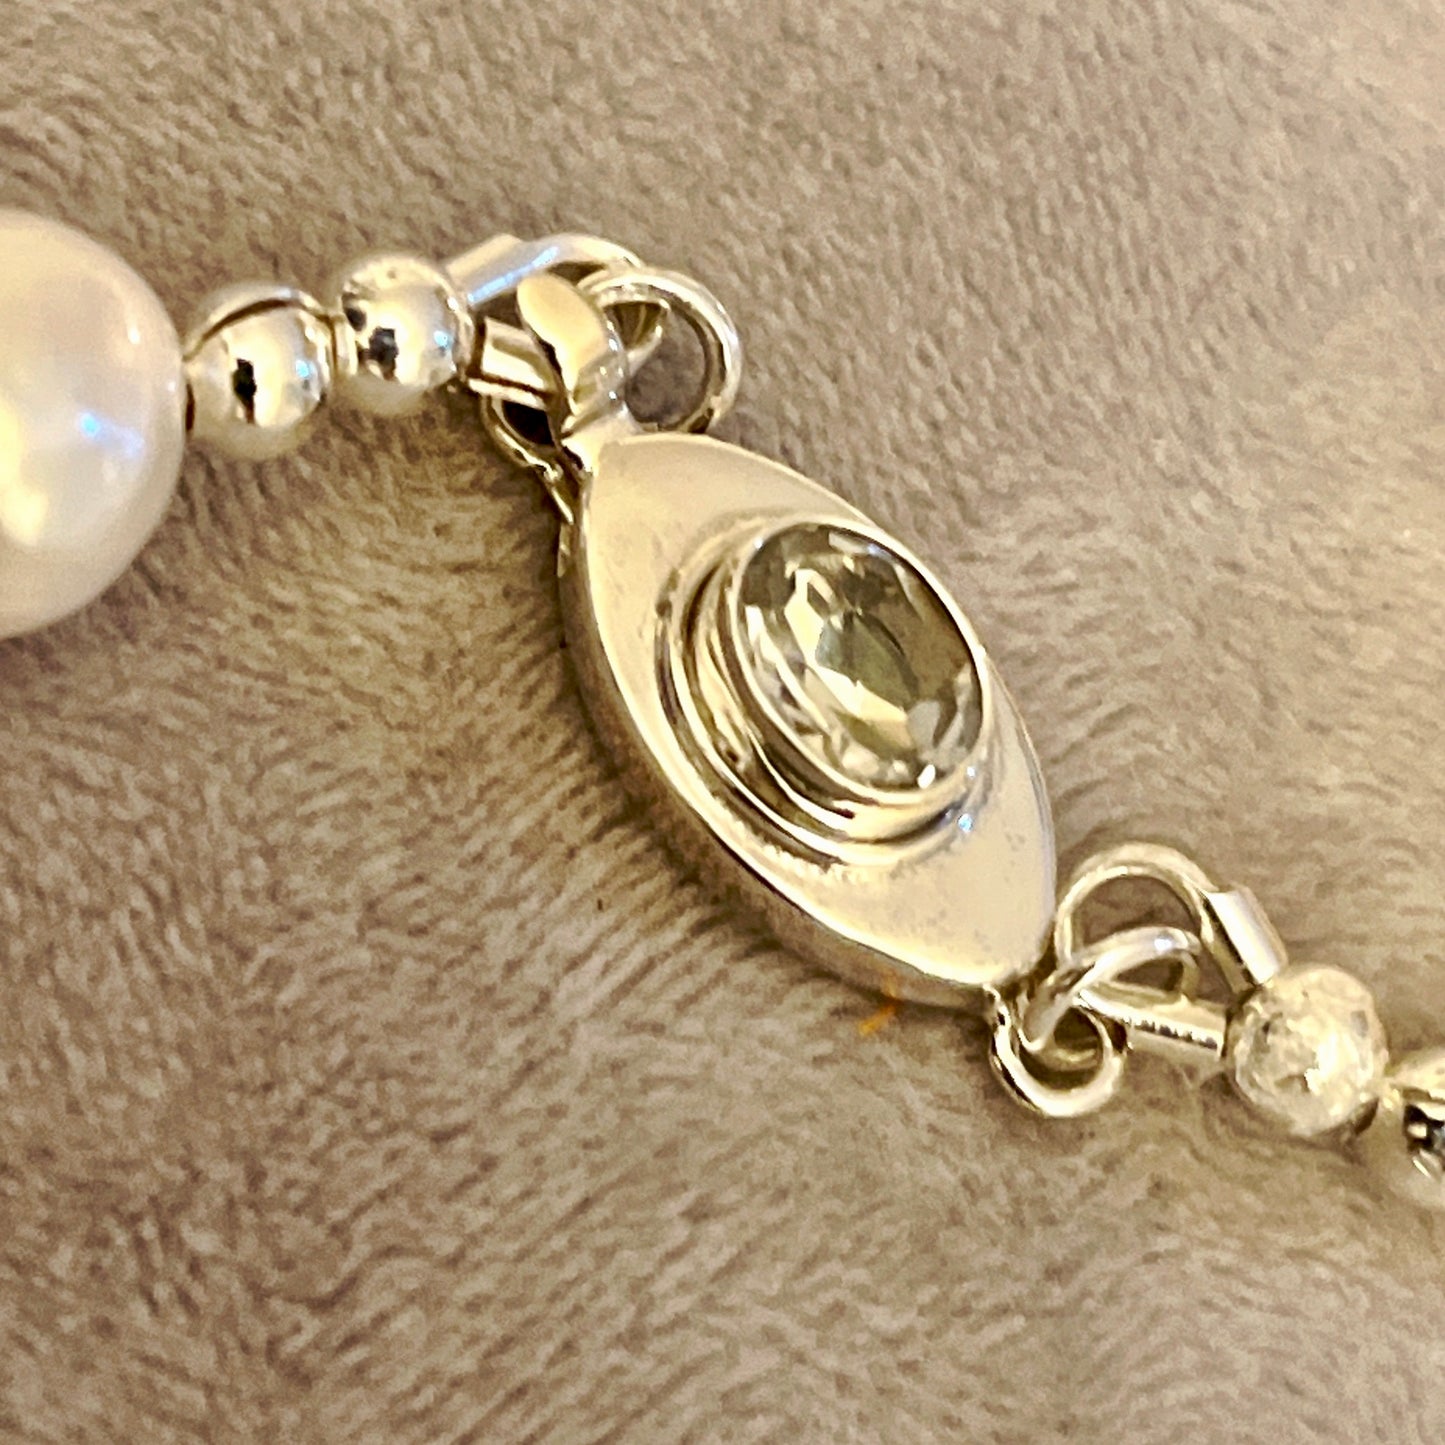 Large white nucleated pearls with sterling silver box clasp